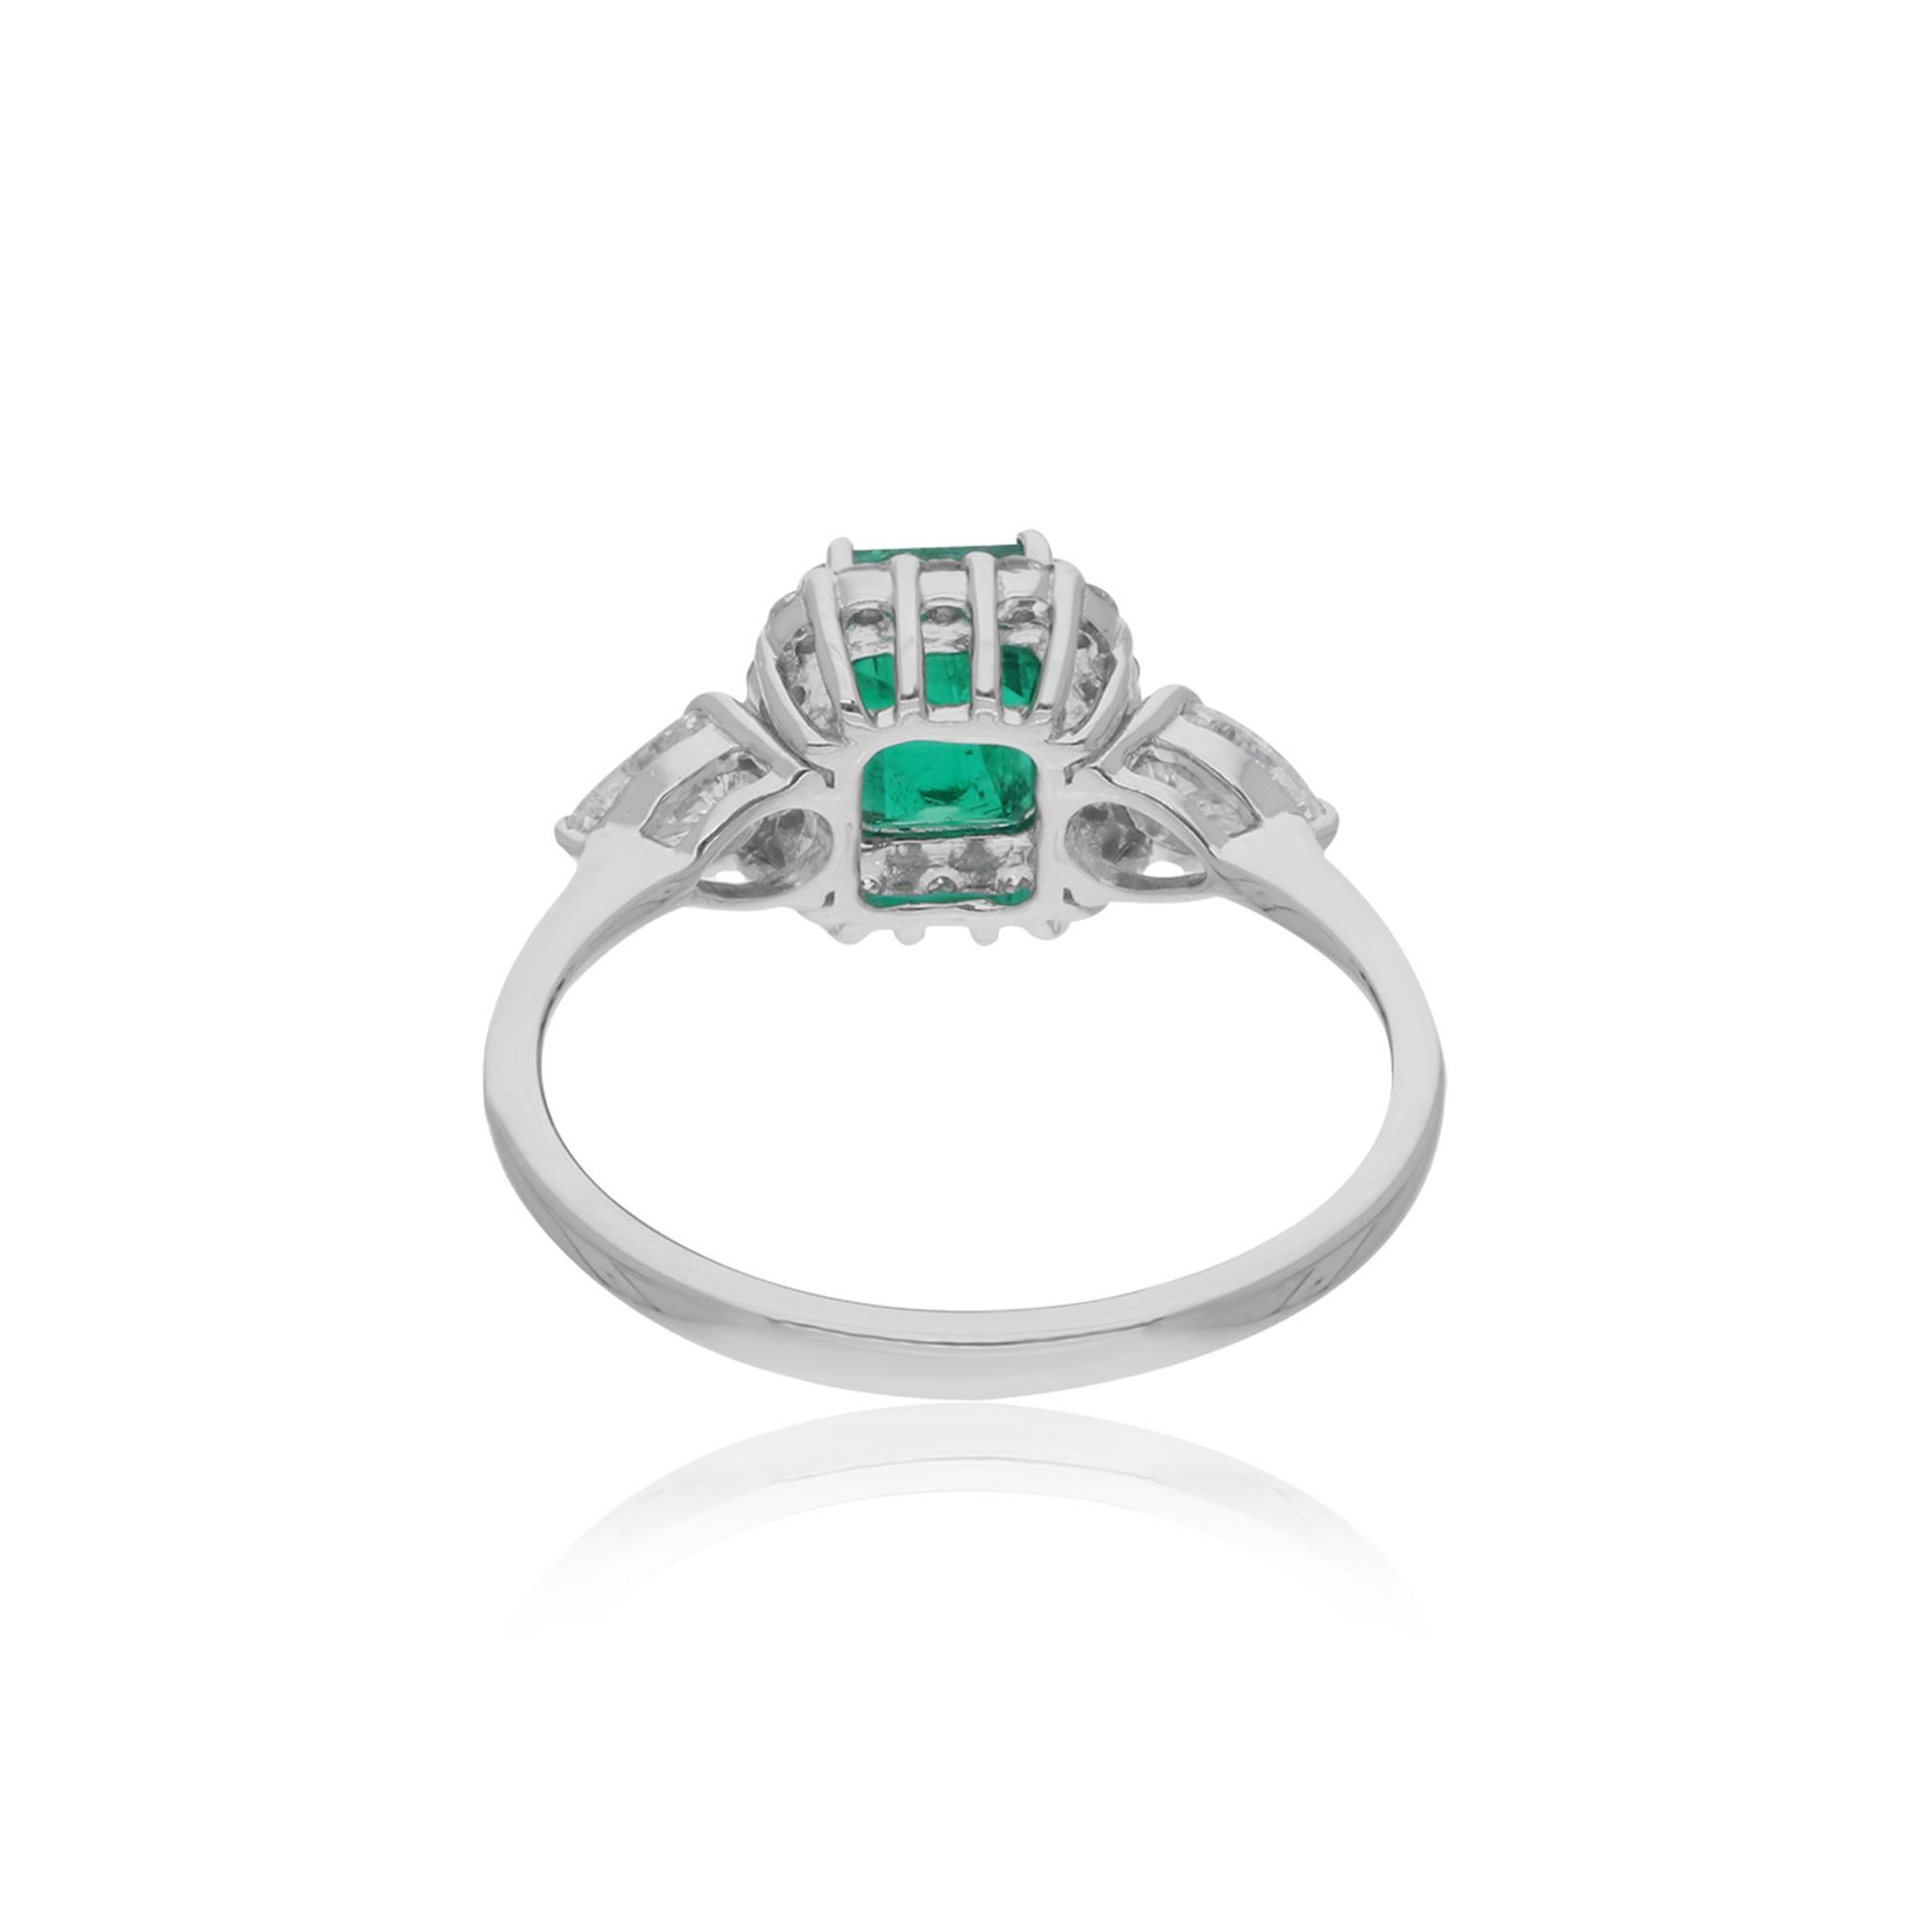 Item Code :- SER-23473
Gross Wt. :- 2.98 gm
18k Solid White Gold Wt. :- 2.59 gm
Natural Diamond Wt. :- 0.61 Ct. ( AVERAGE DIAMOND CLARITY SI1-SI2 & COLOR H-I )
Emerald Wt. :- 1.35 Ct. 
Ring Size :- 7 US & All size available

✦